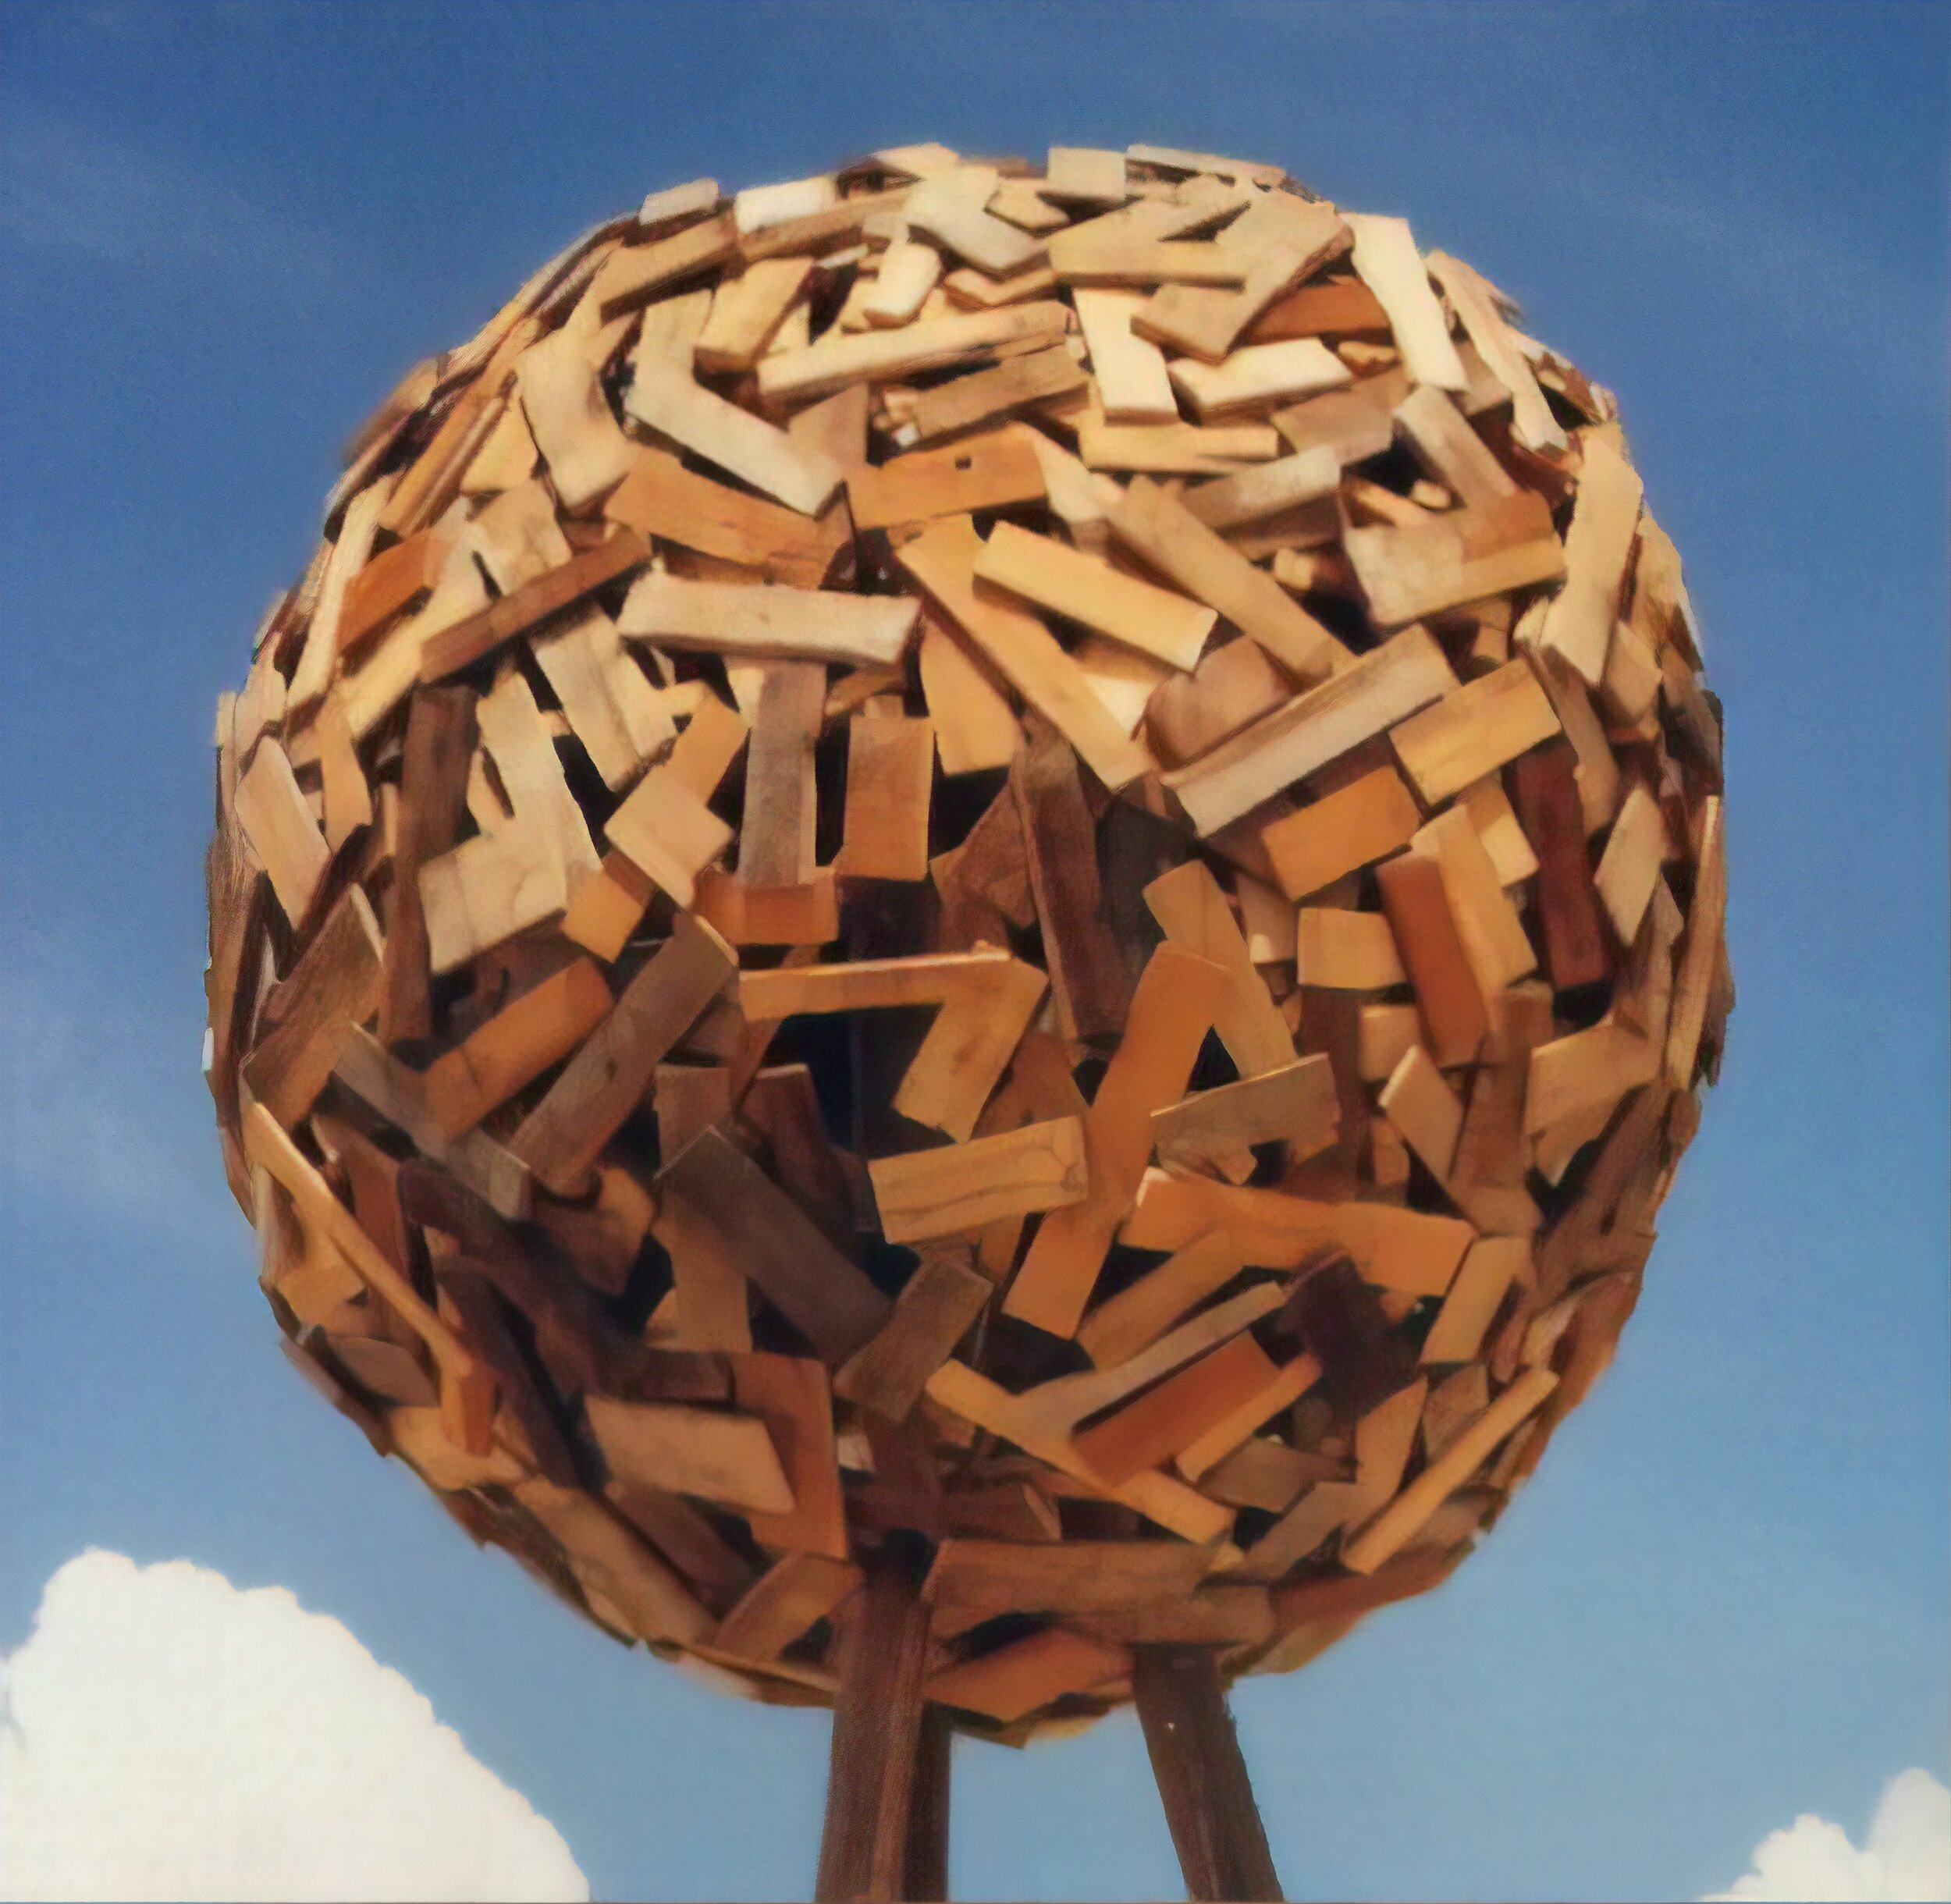  Orbicular Affect One of the four balls before burning with the Man.  Six foot diameter; made of wood scraps. 